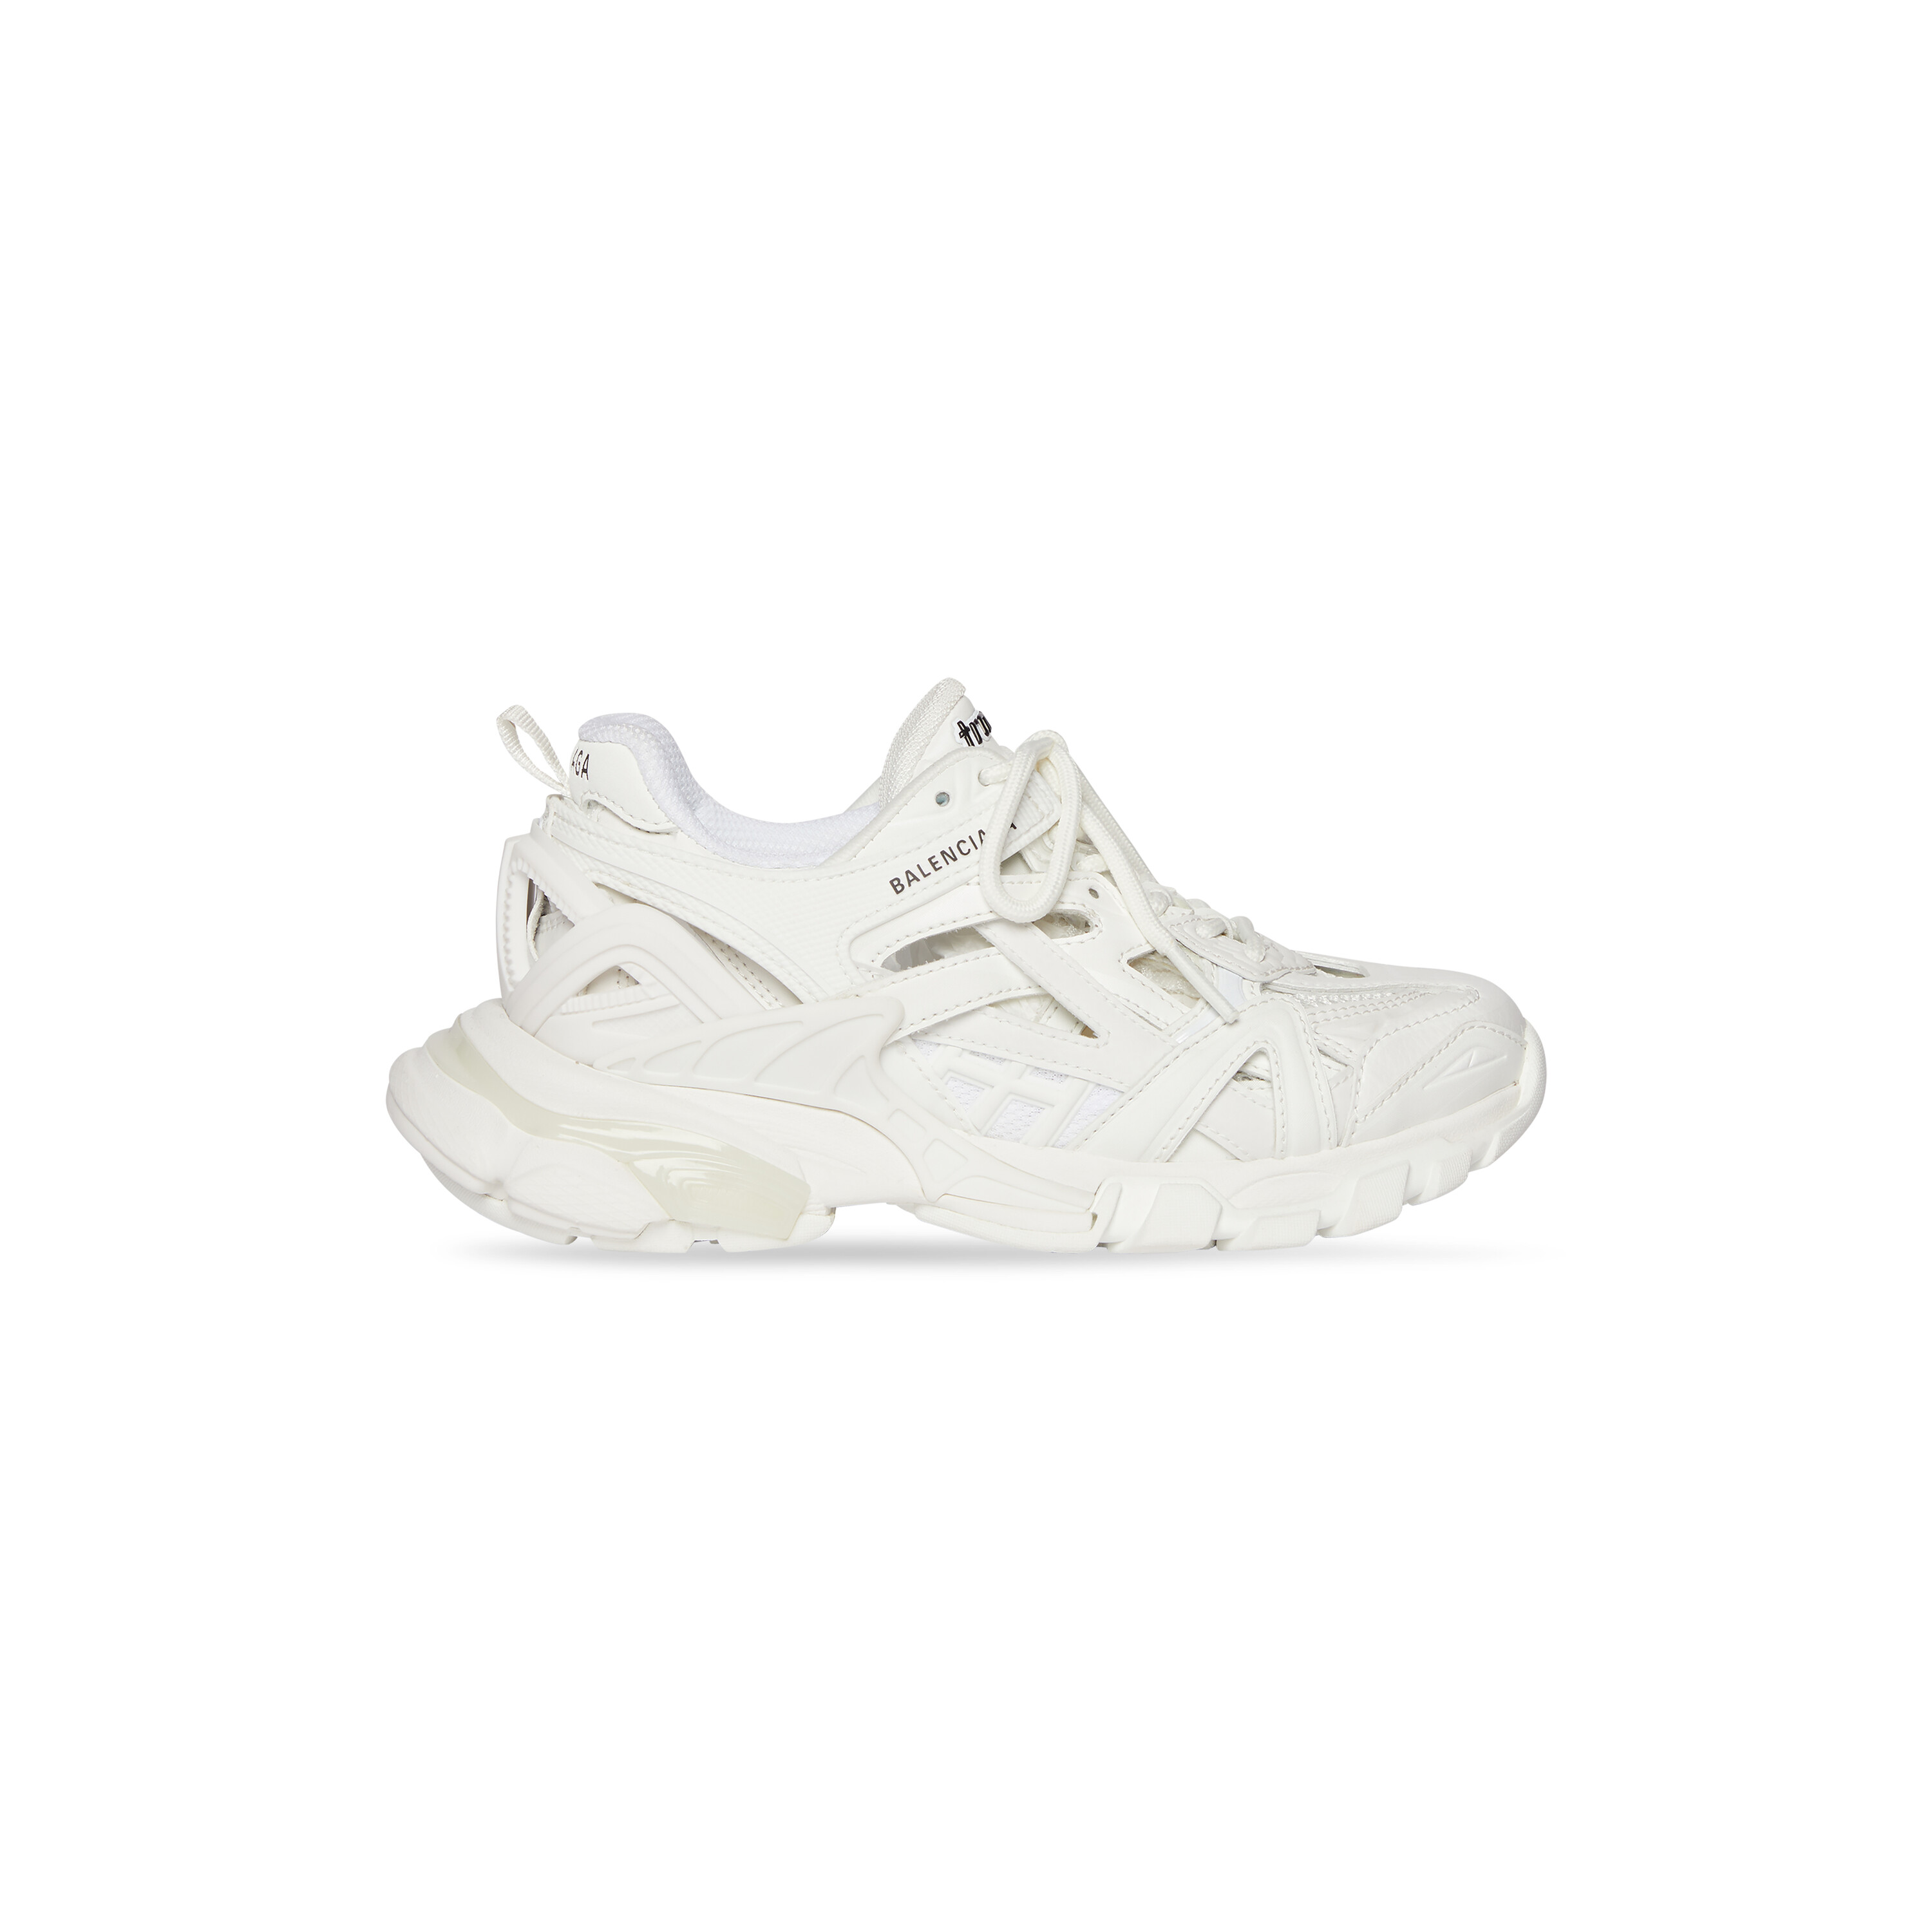 Balenciaga kids designer sneakers compare prices and buy online